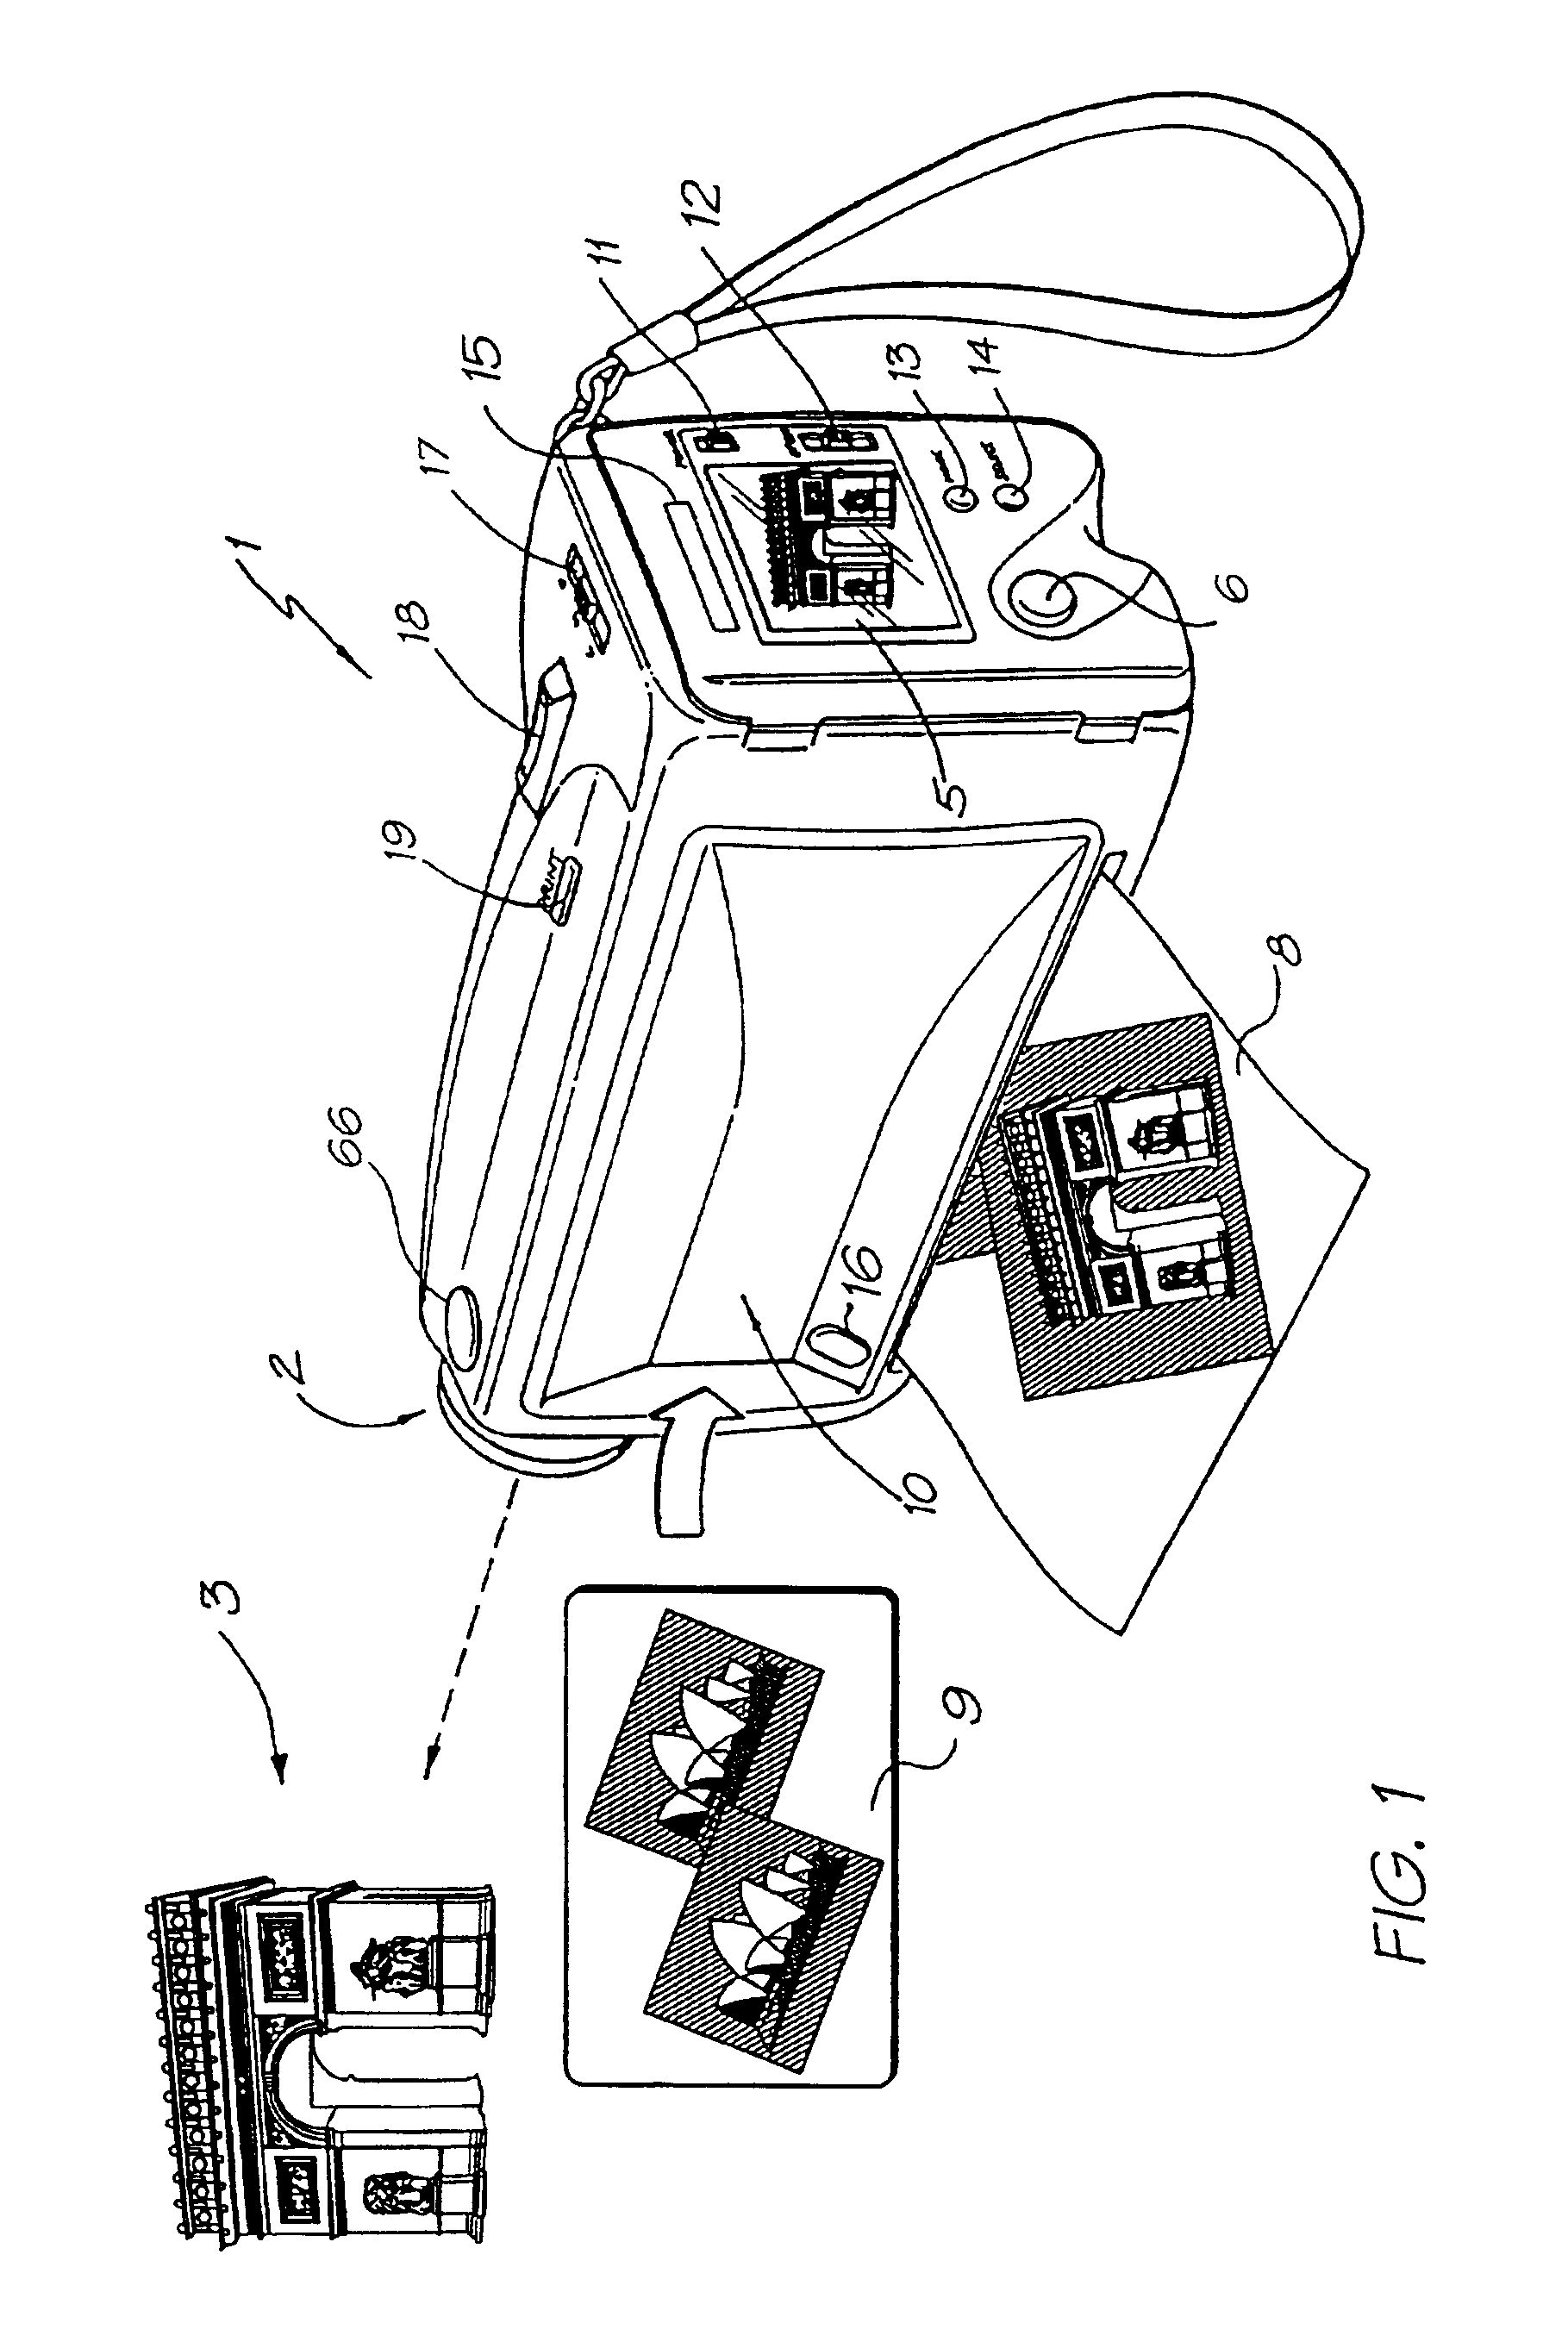 Printing cartridge with barcode identification